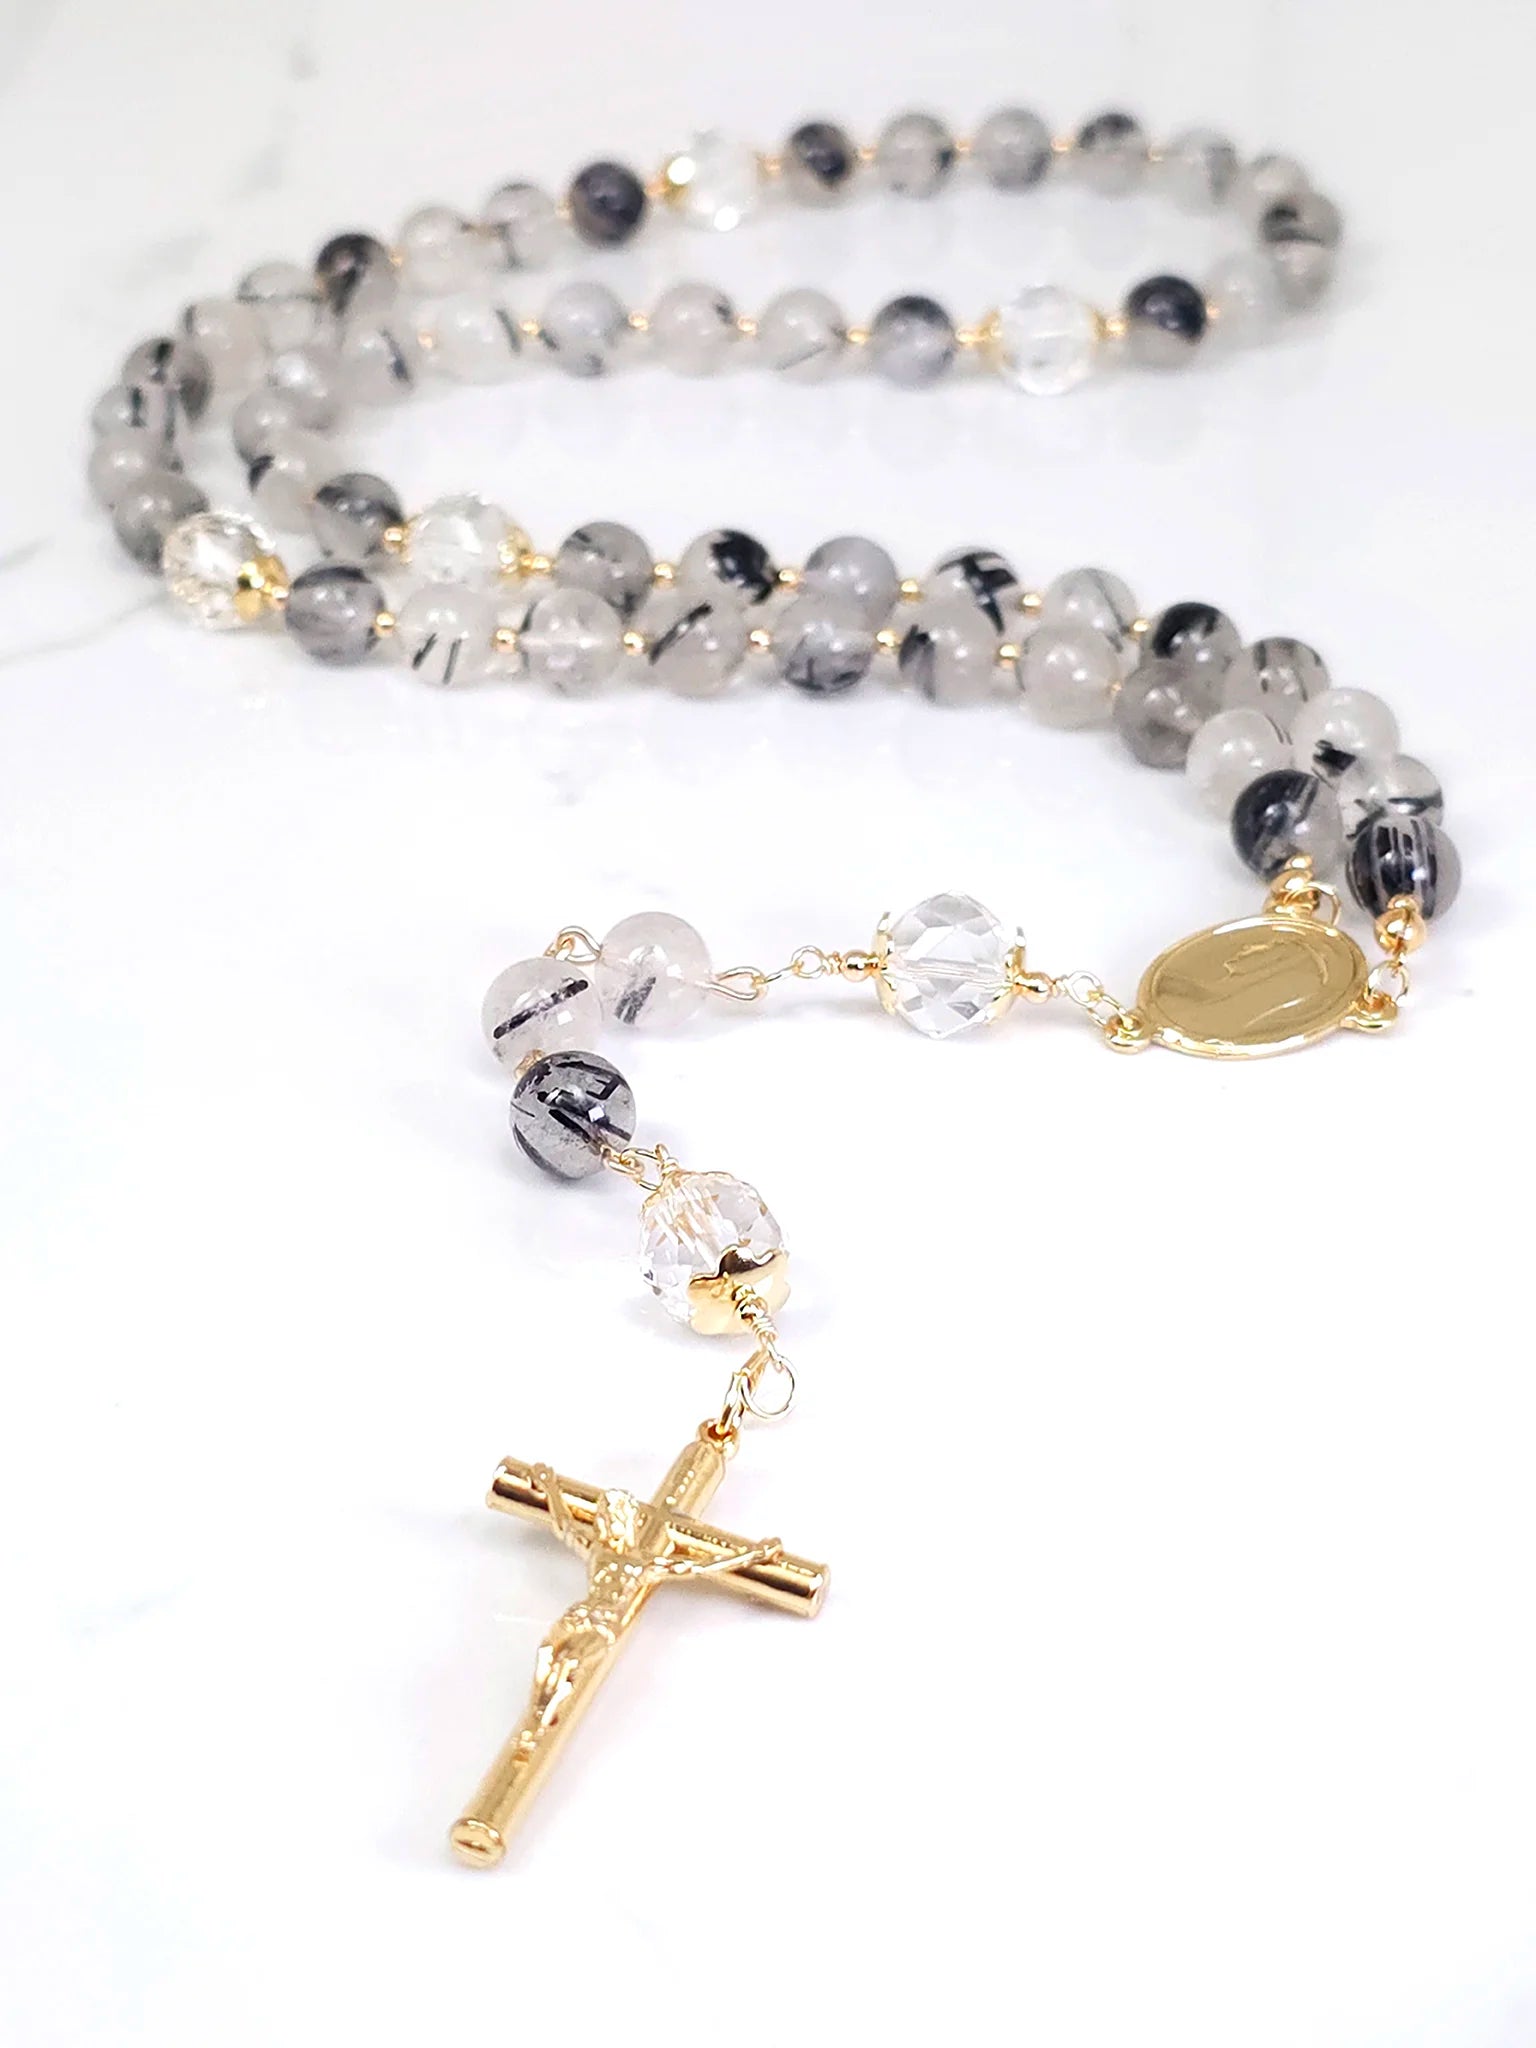 A masterful creation, accentuated by gold-filled metal findings and a Gold-plated Crucifix pendant.